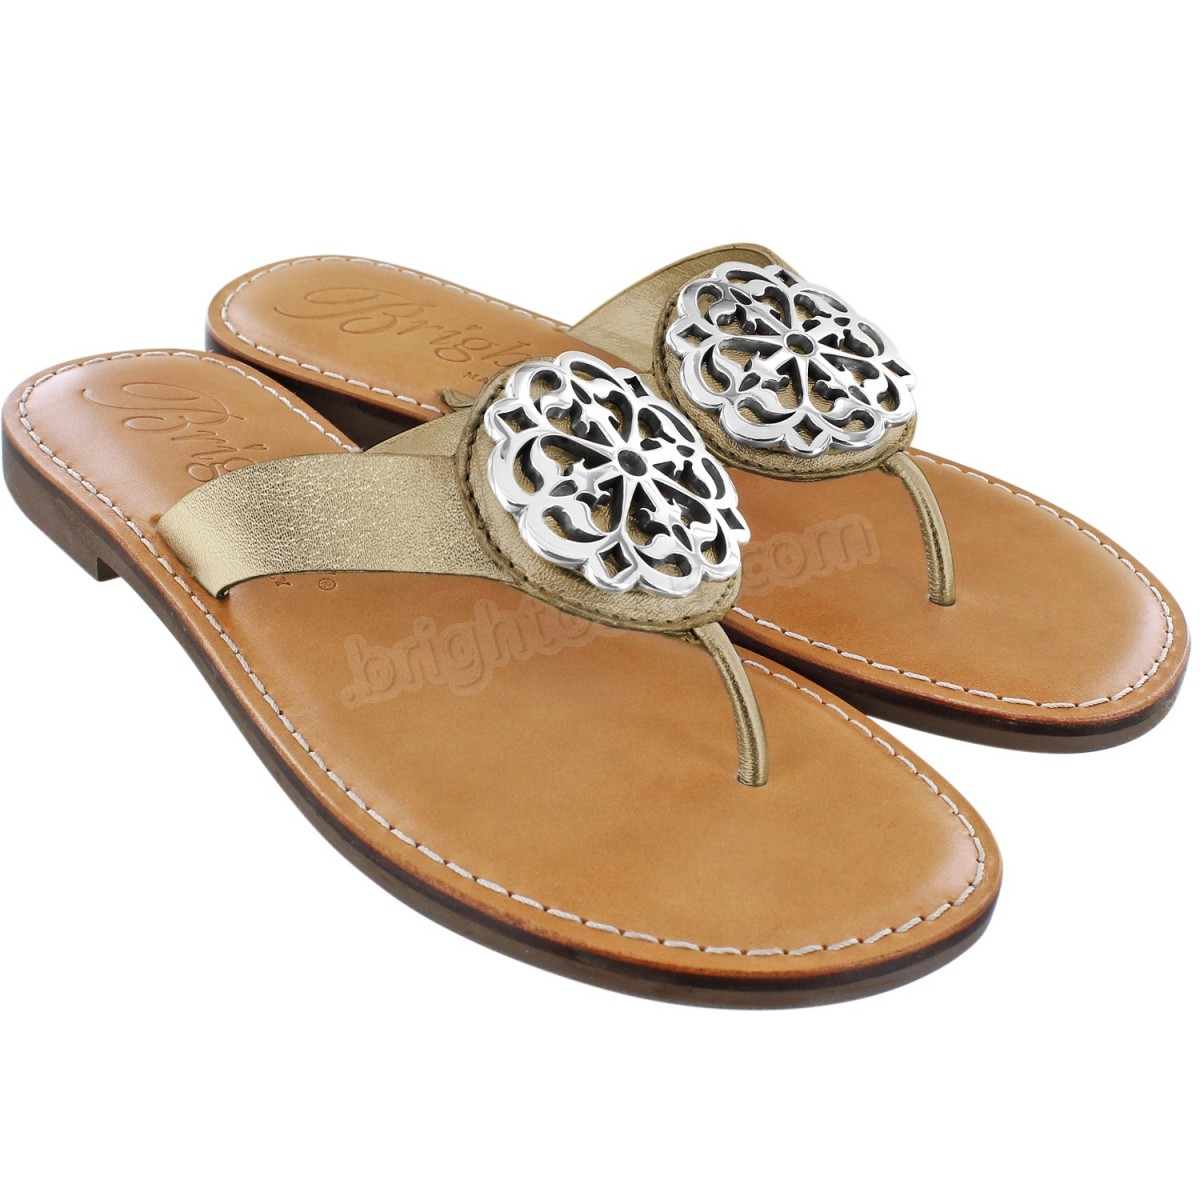 Brighton Collectibles & Online Discount Twine Woven Sandals - -7